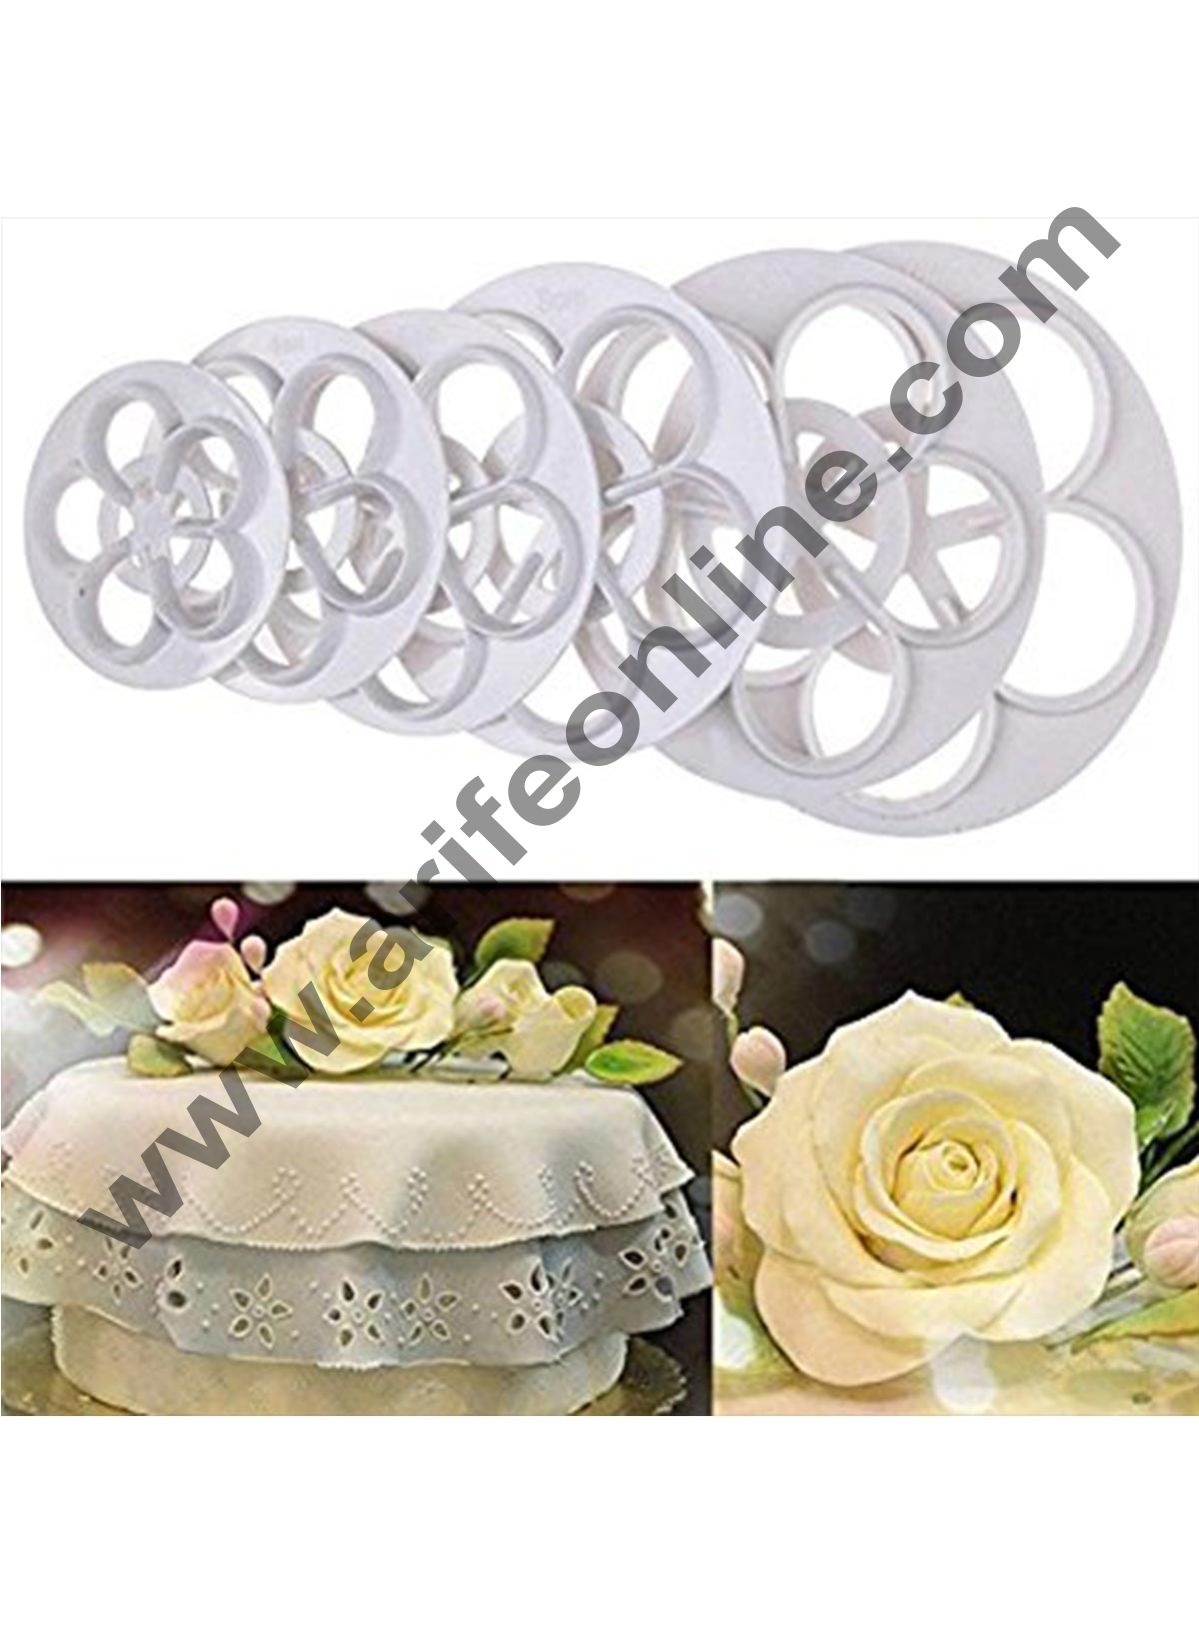 Cake Decorating Supplies, Gumpaste, Icing Tools & Cutters